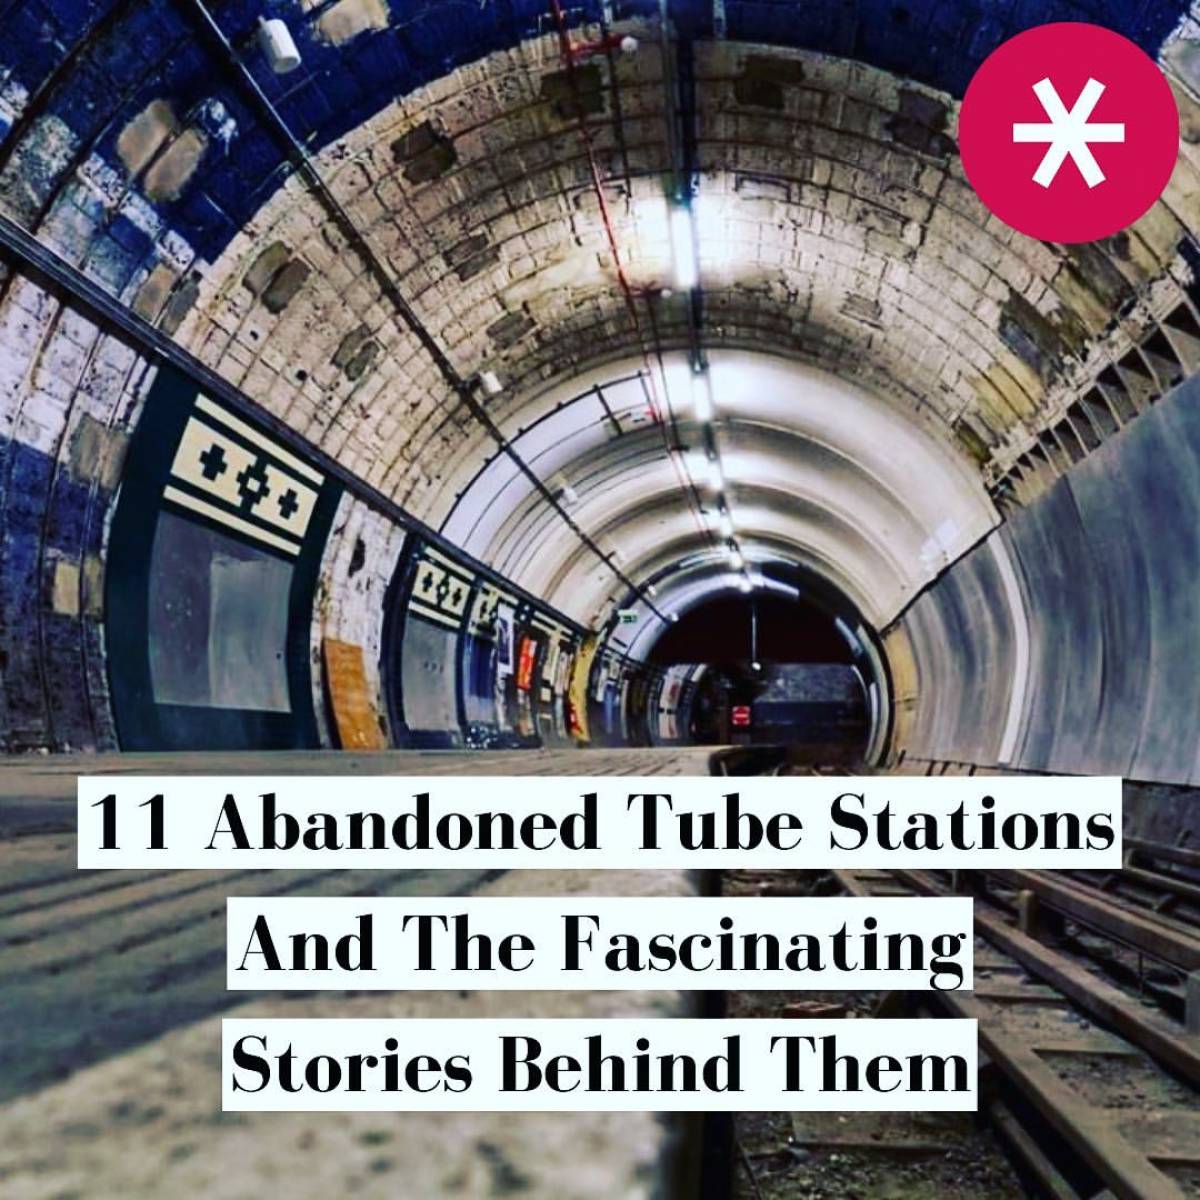 11 Abandoned Tube Stations and the fascinating stories behind them